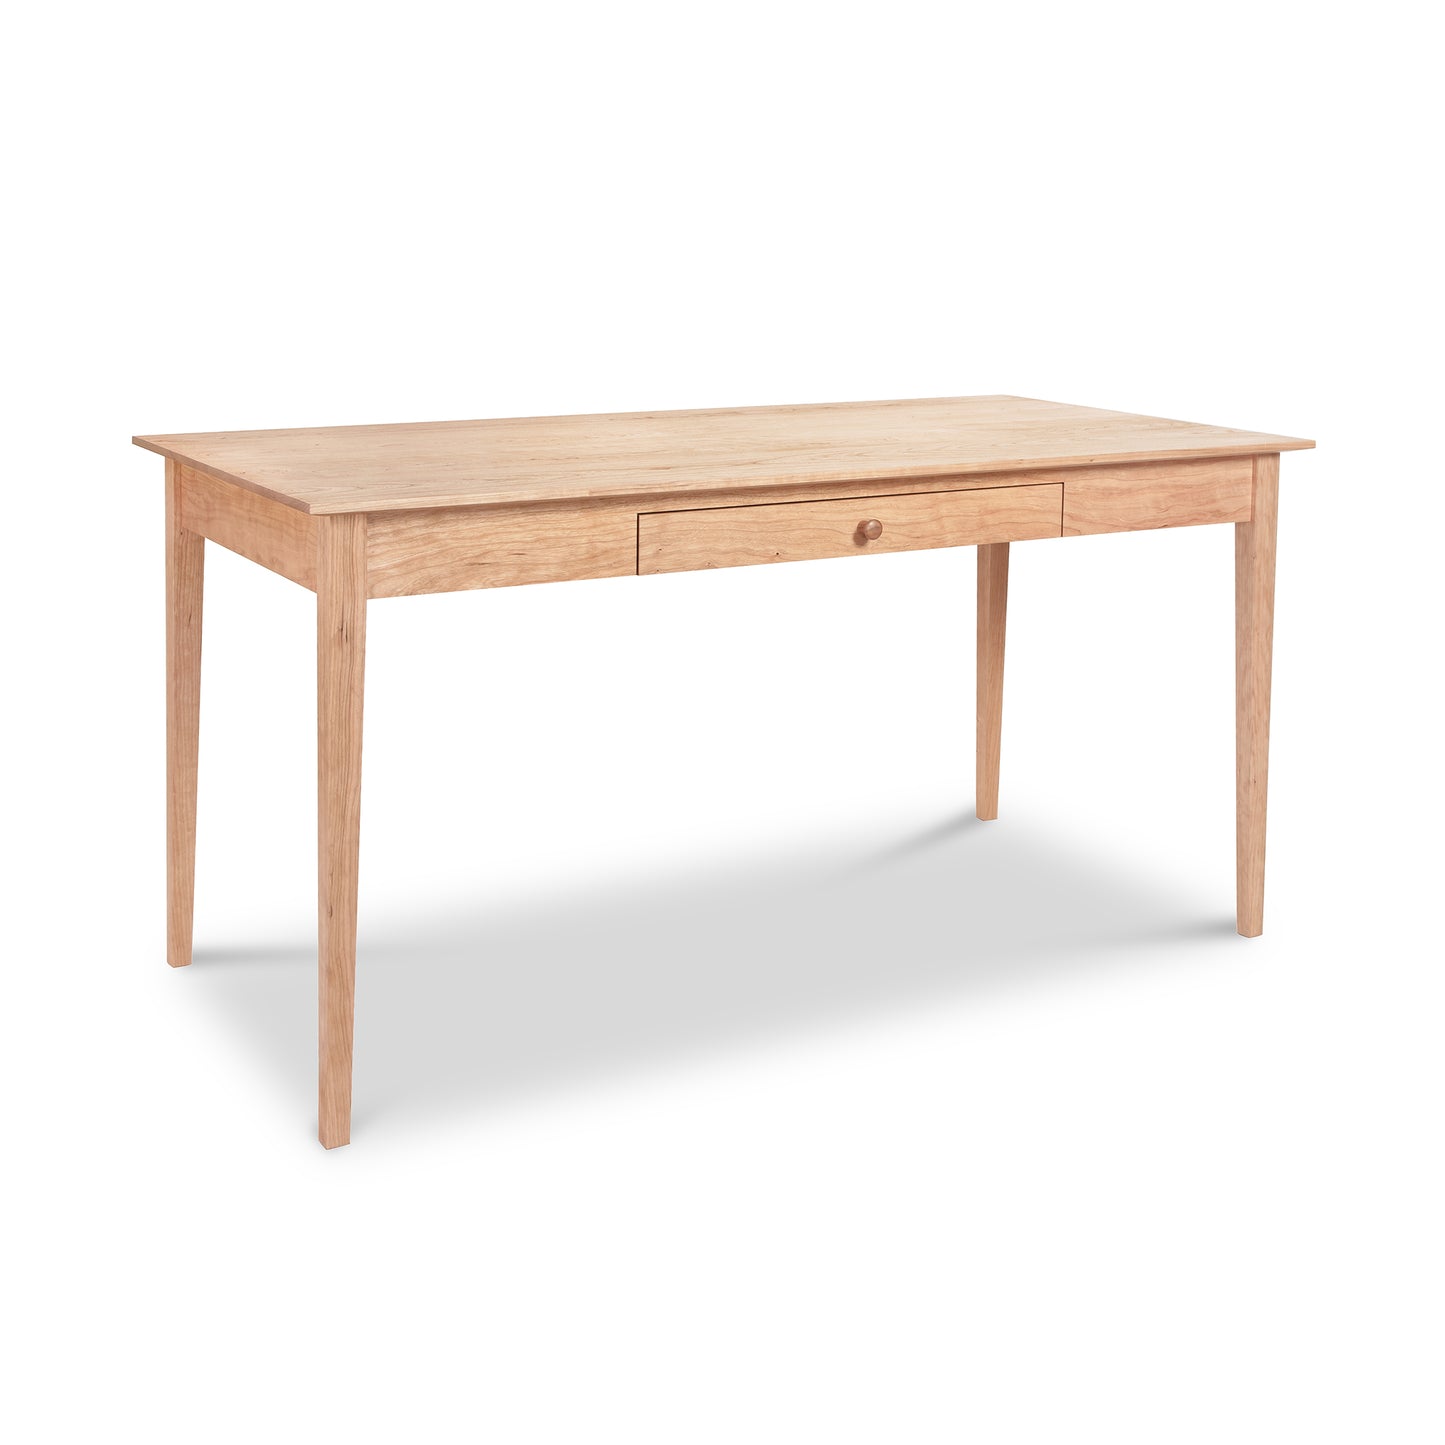 A Maple Corner Woodworks American Shaker Writing Desk, with a single central drawer, isolated on a white background.